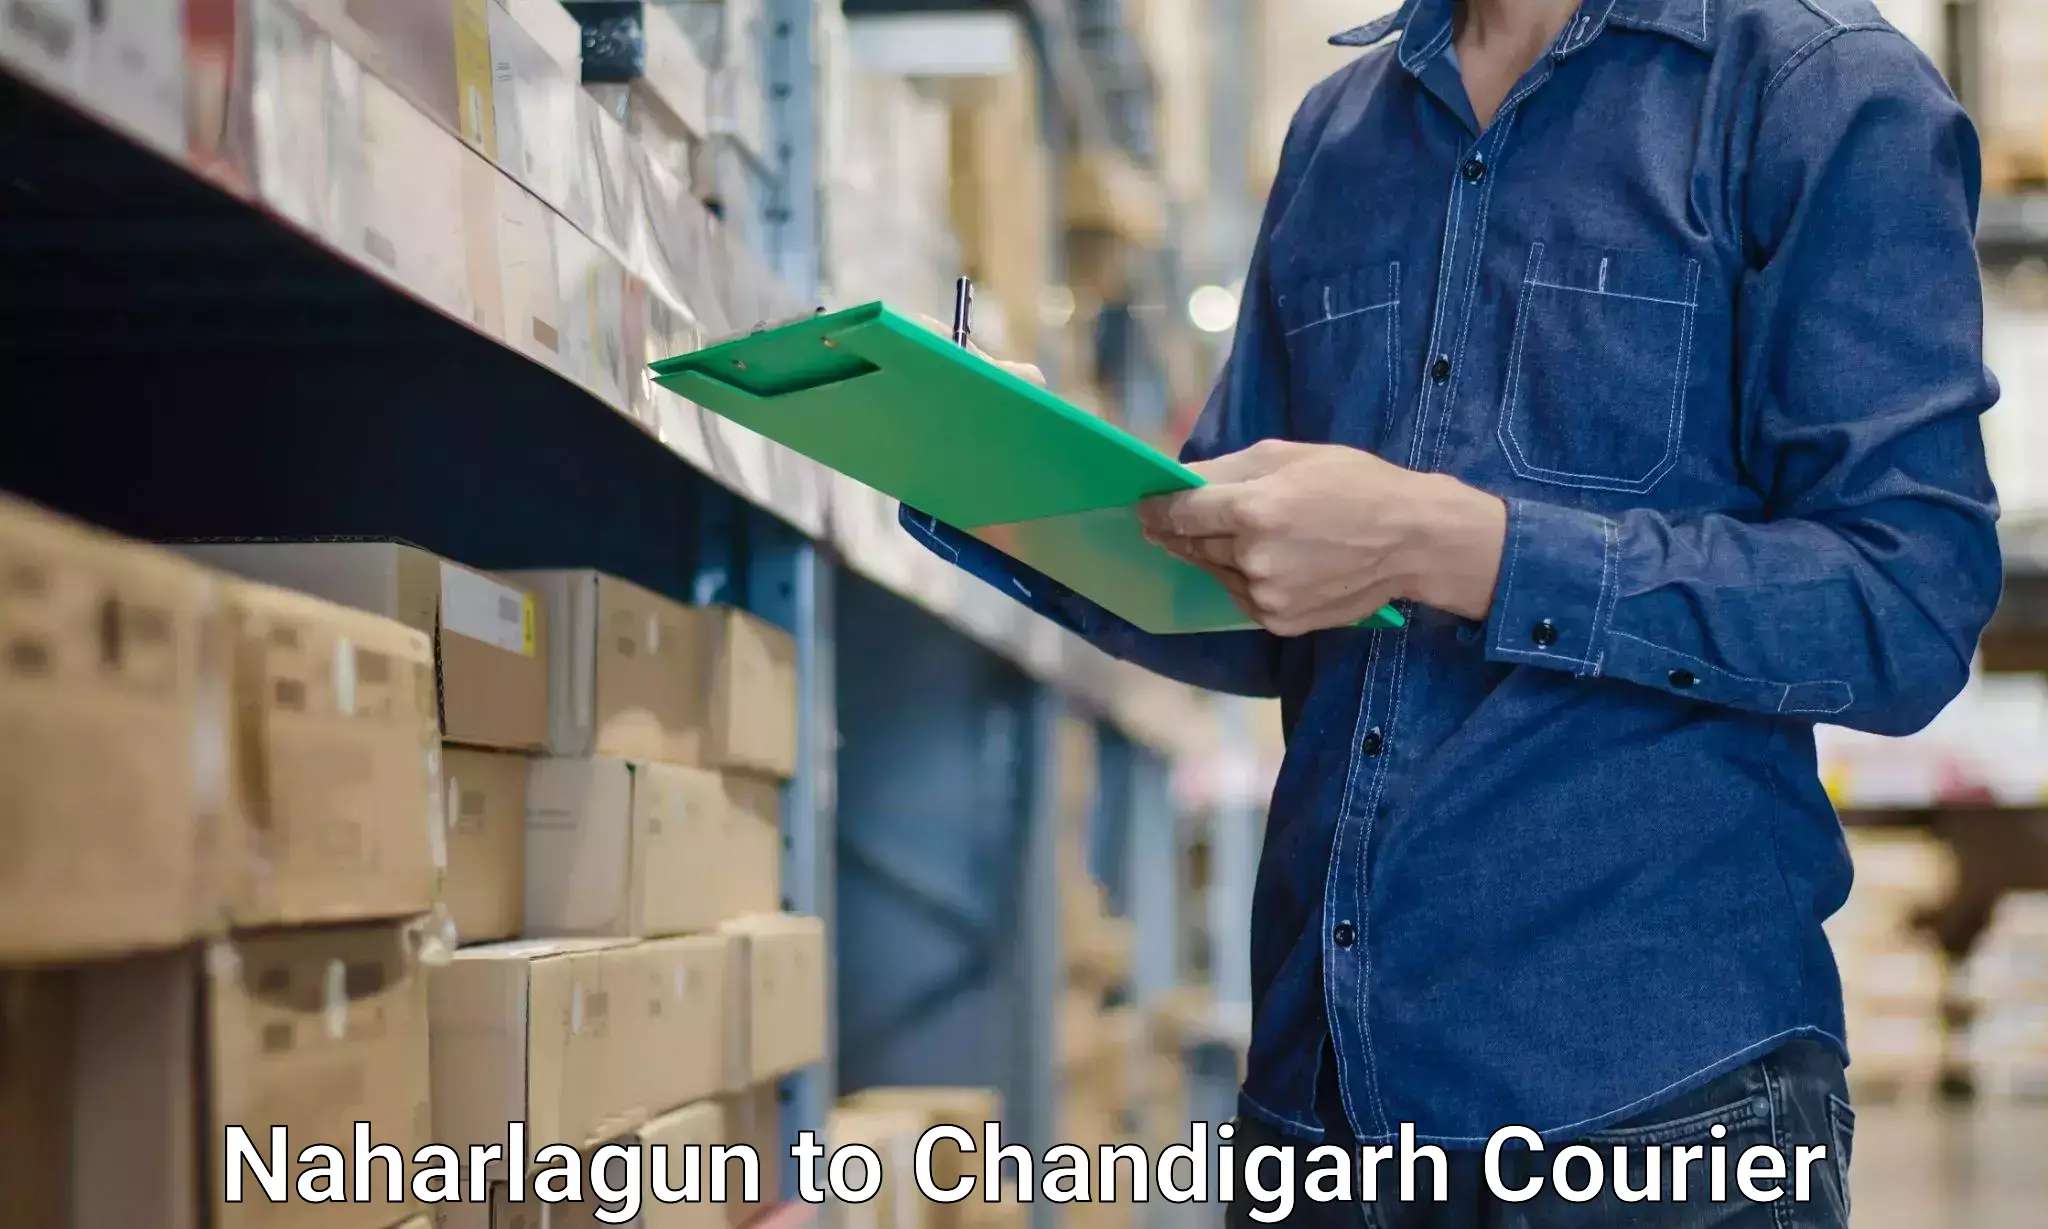 Trusted moving company Naharlagun to Chandigarh